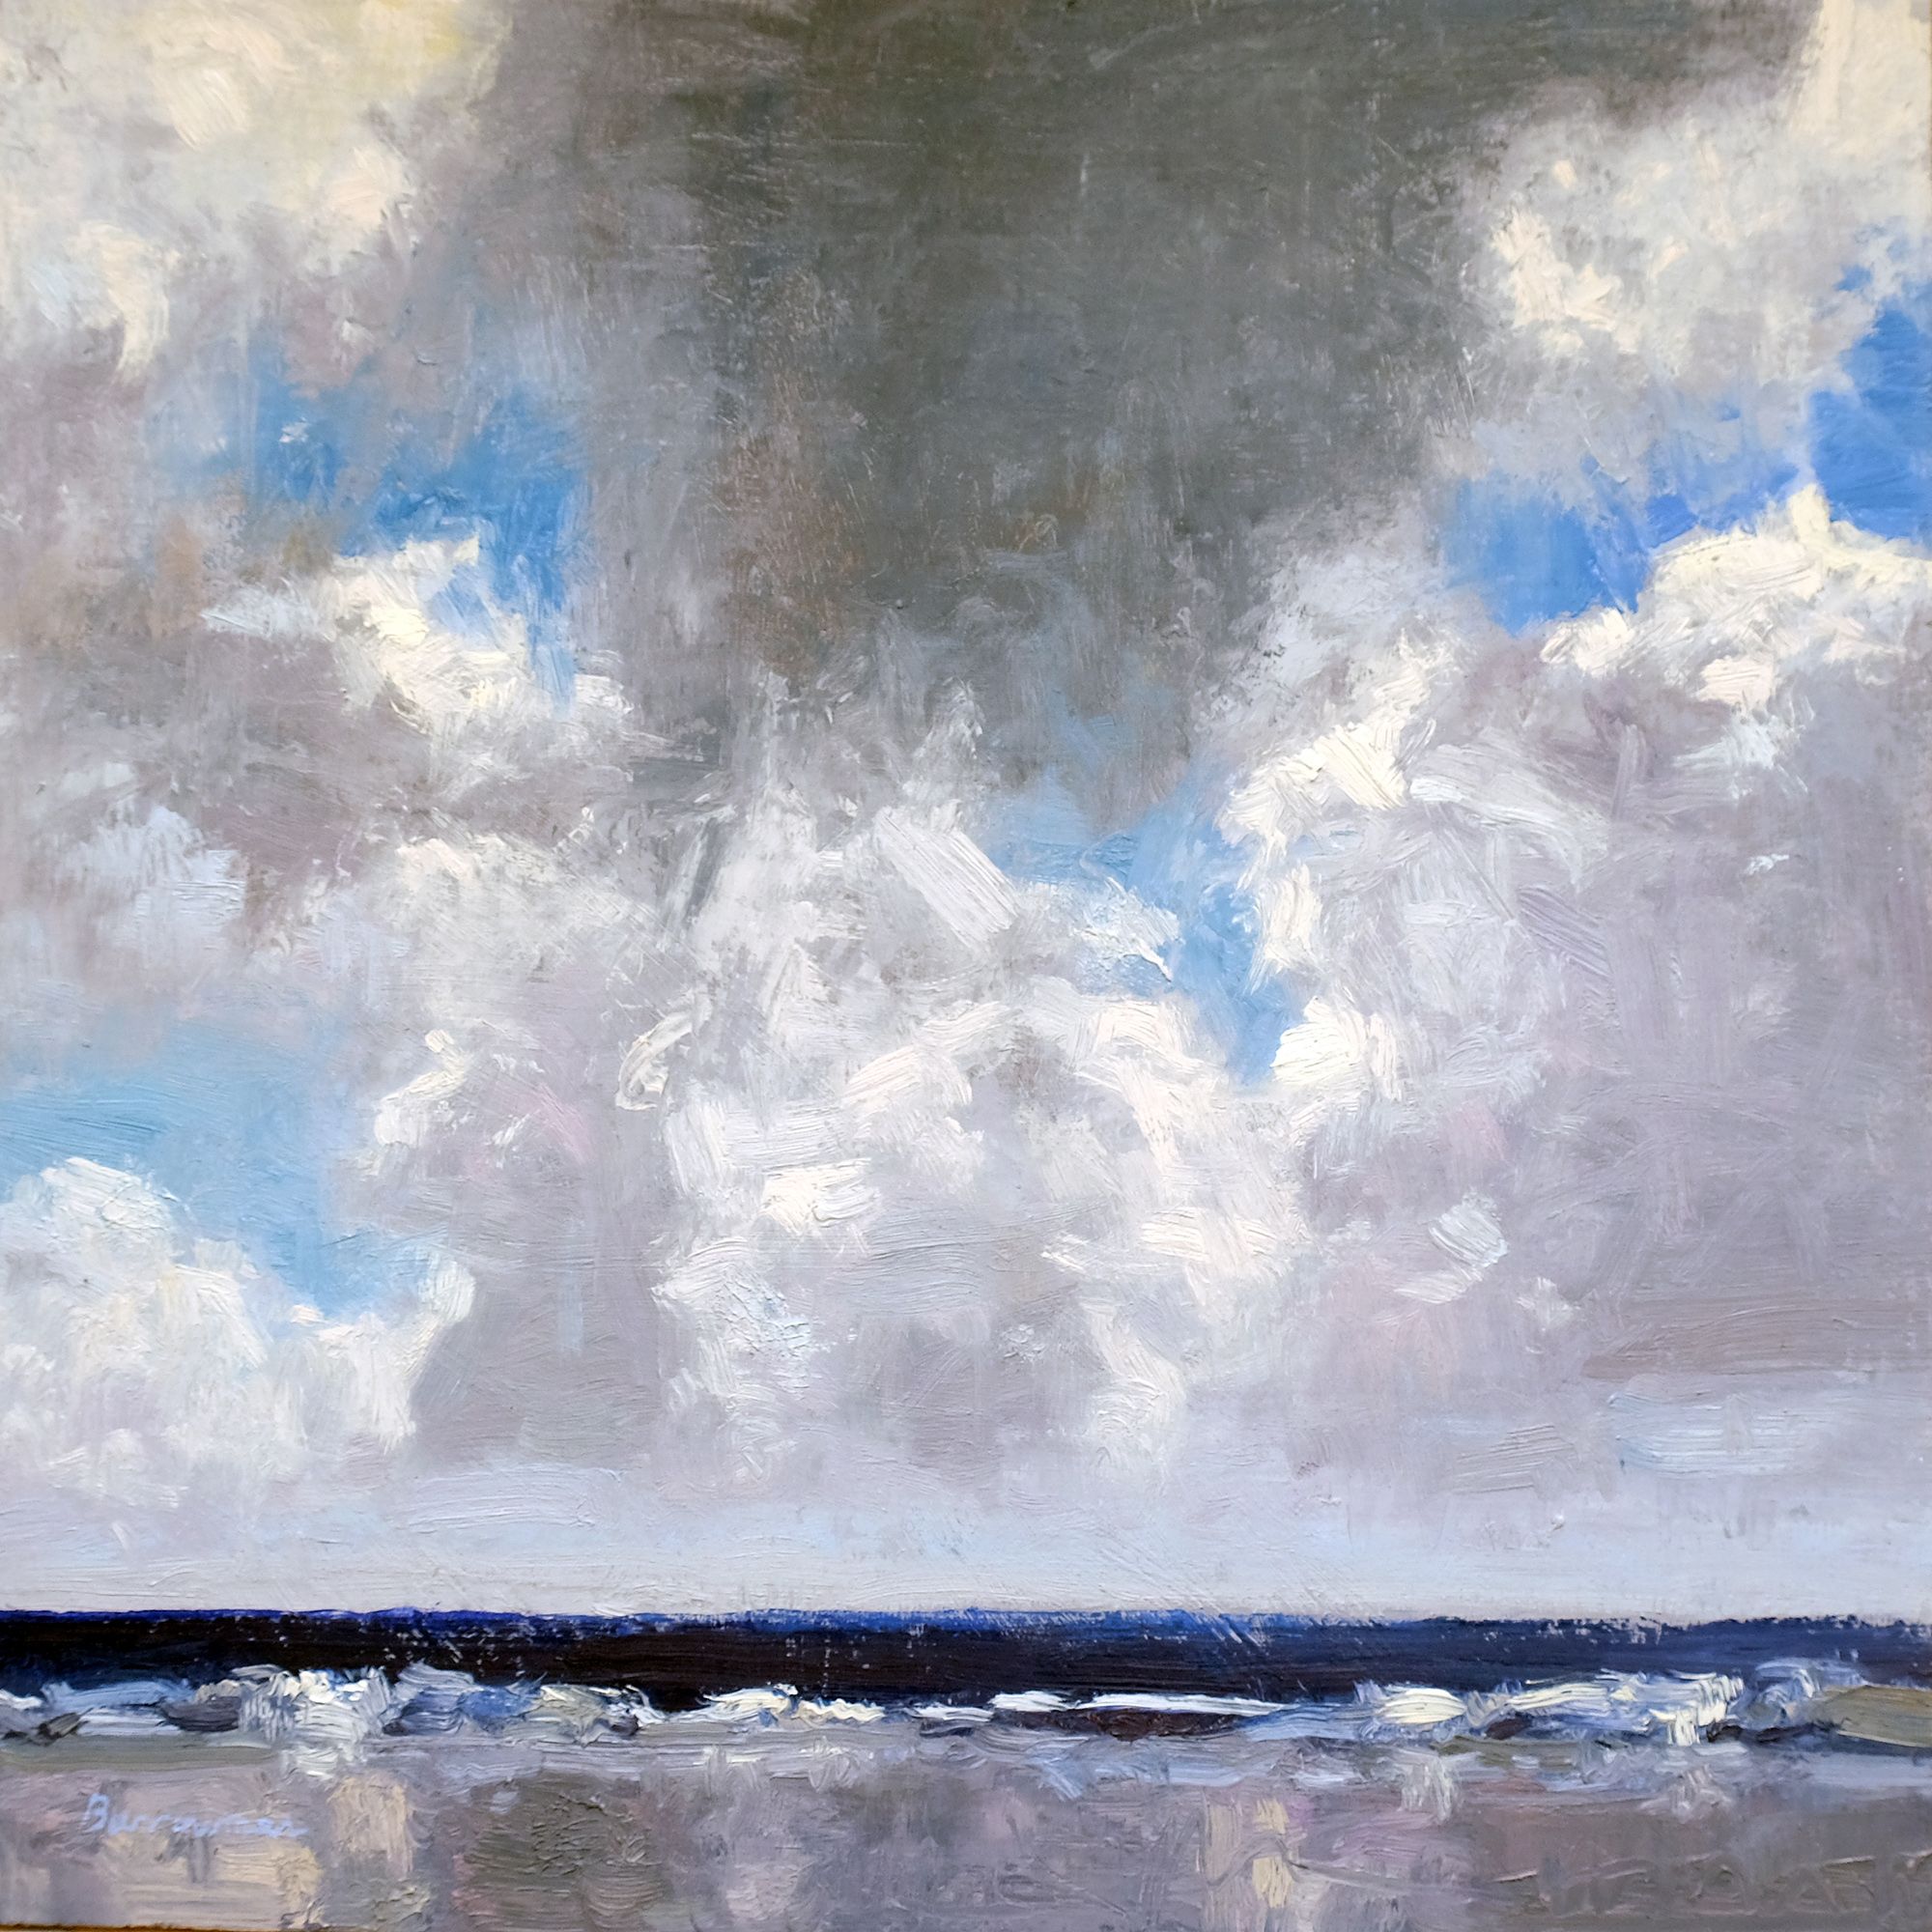 Clouds, sea and reflections by Andrew Barrowman